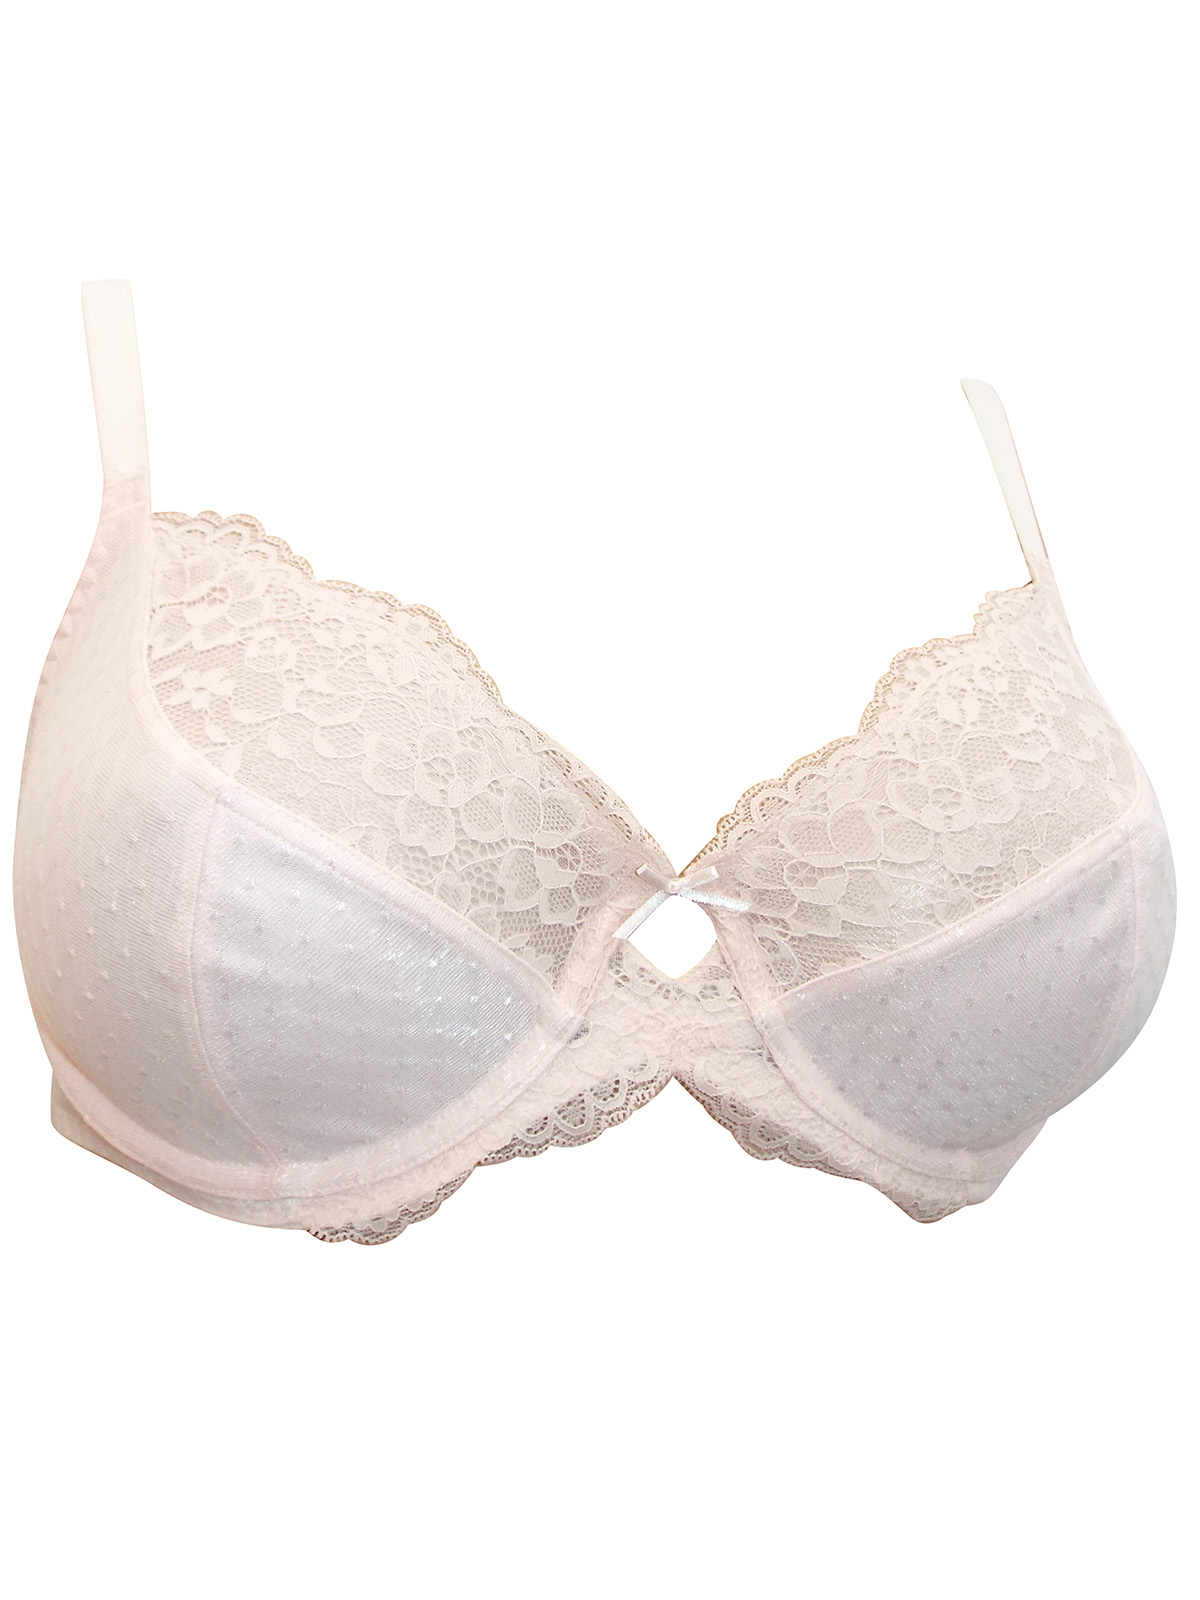 George - - G3ORGE PINK Non-Padded Full Cup Bra - Size 36 (DD cup)